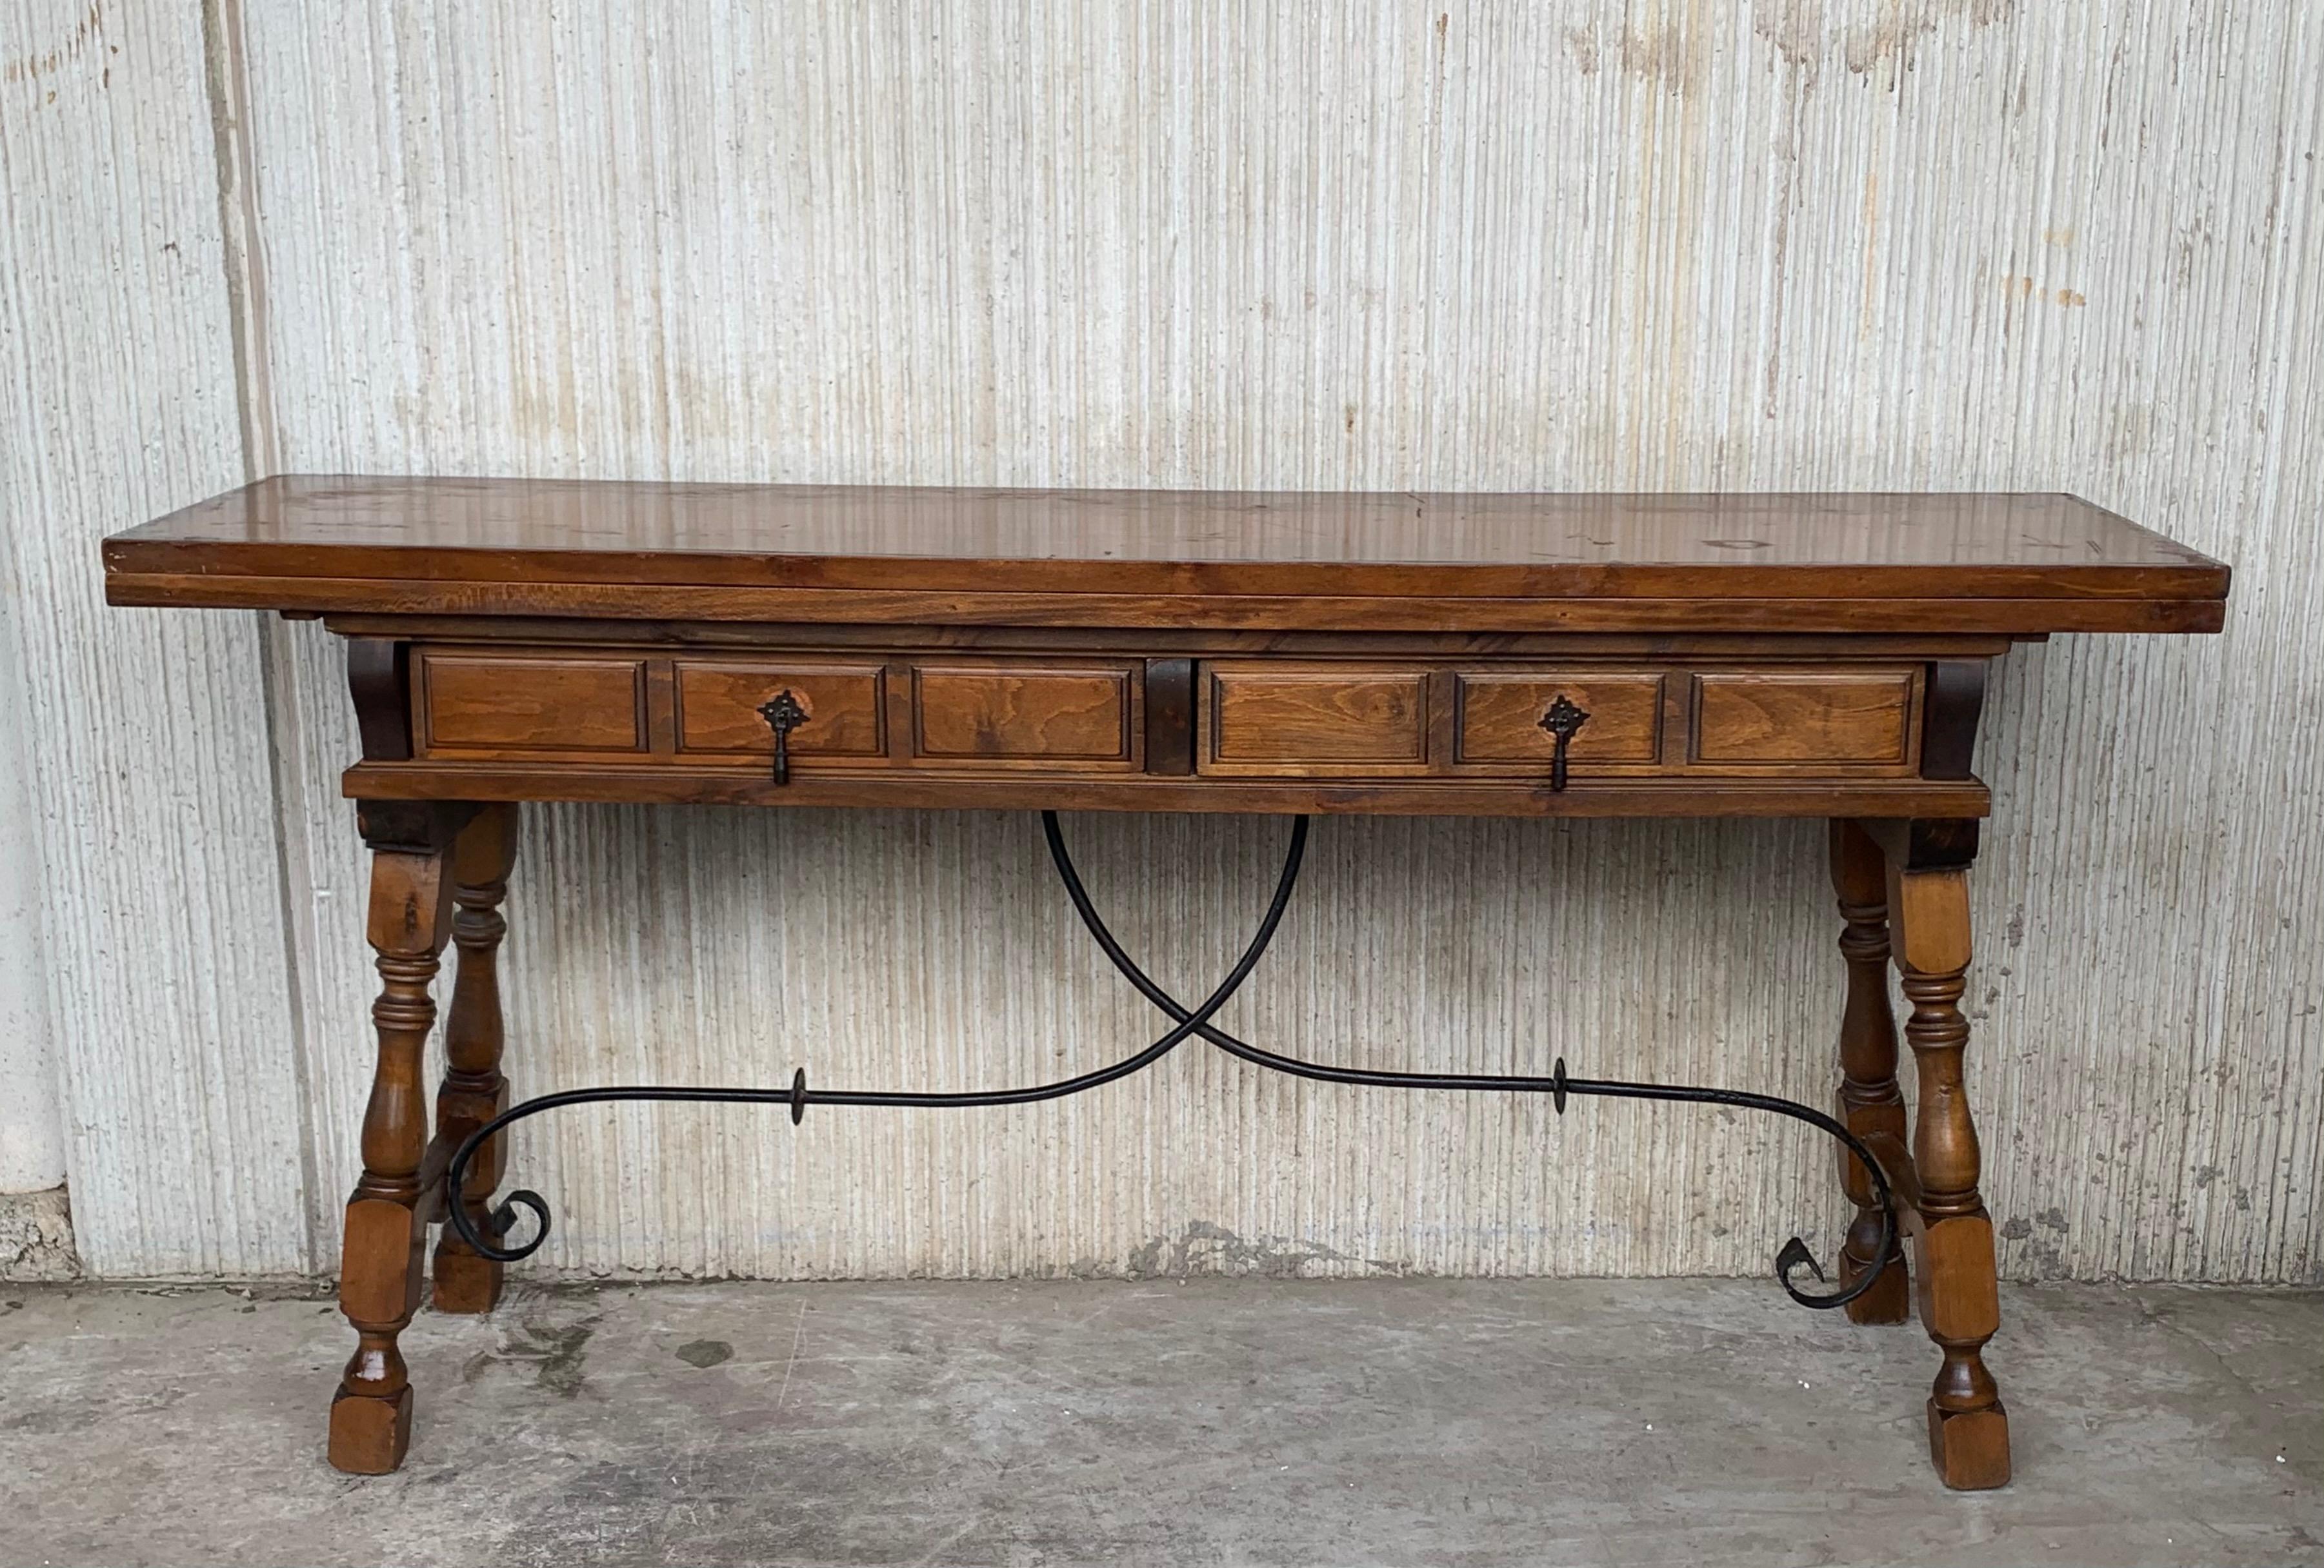 20th century Spanish console fold out farm table
Works as both a dining table and console.
Extra measures:
31.49